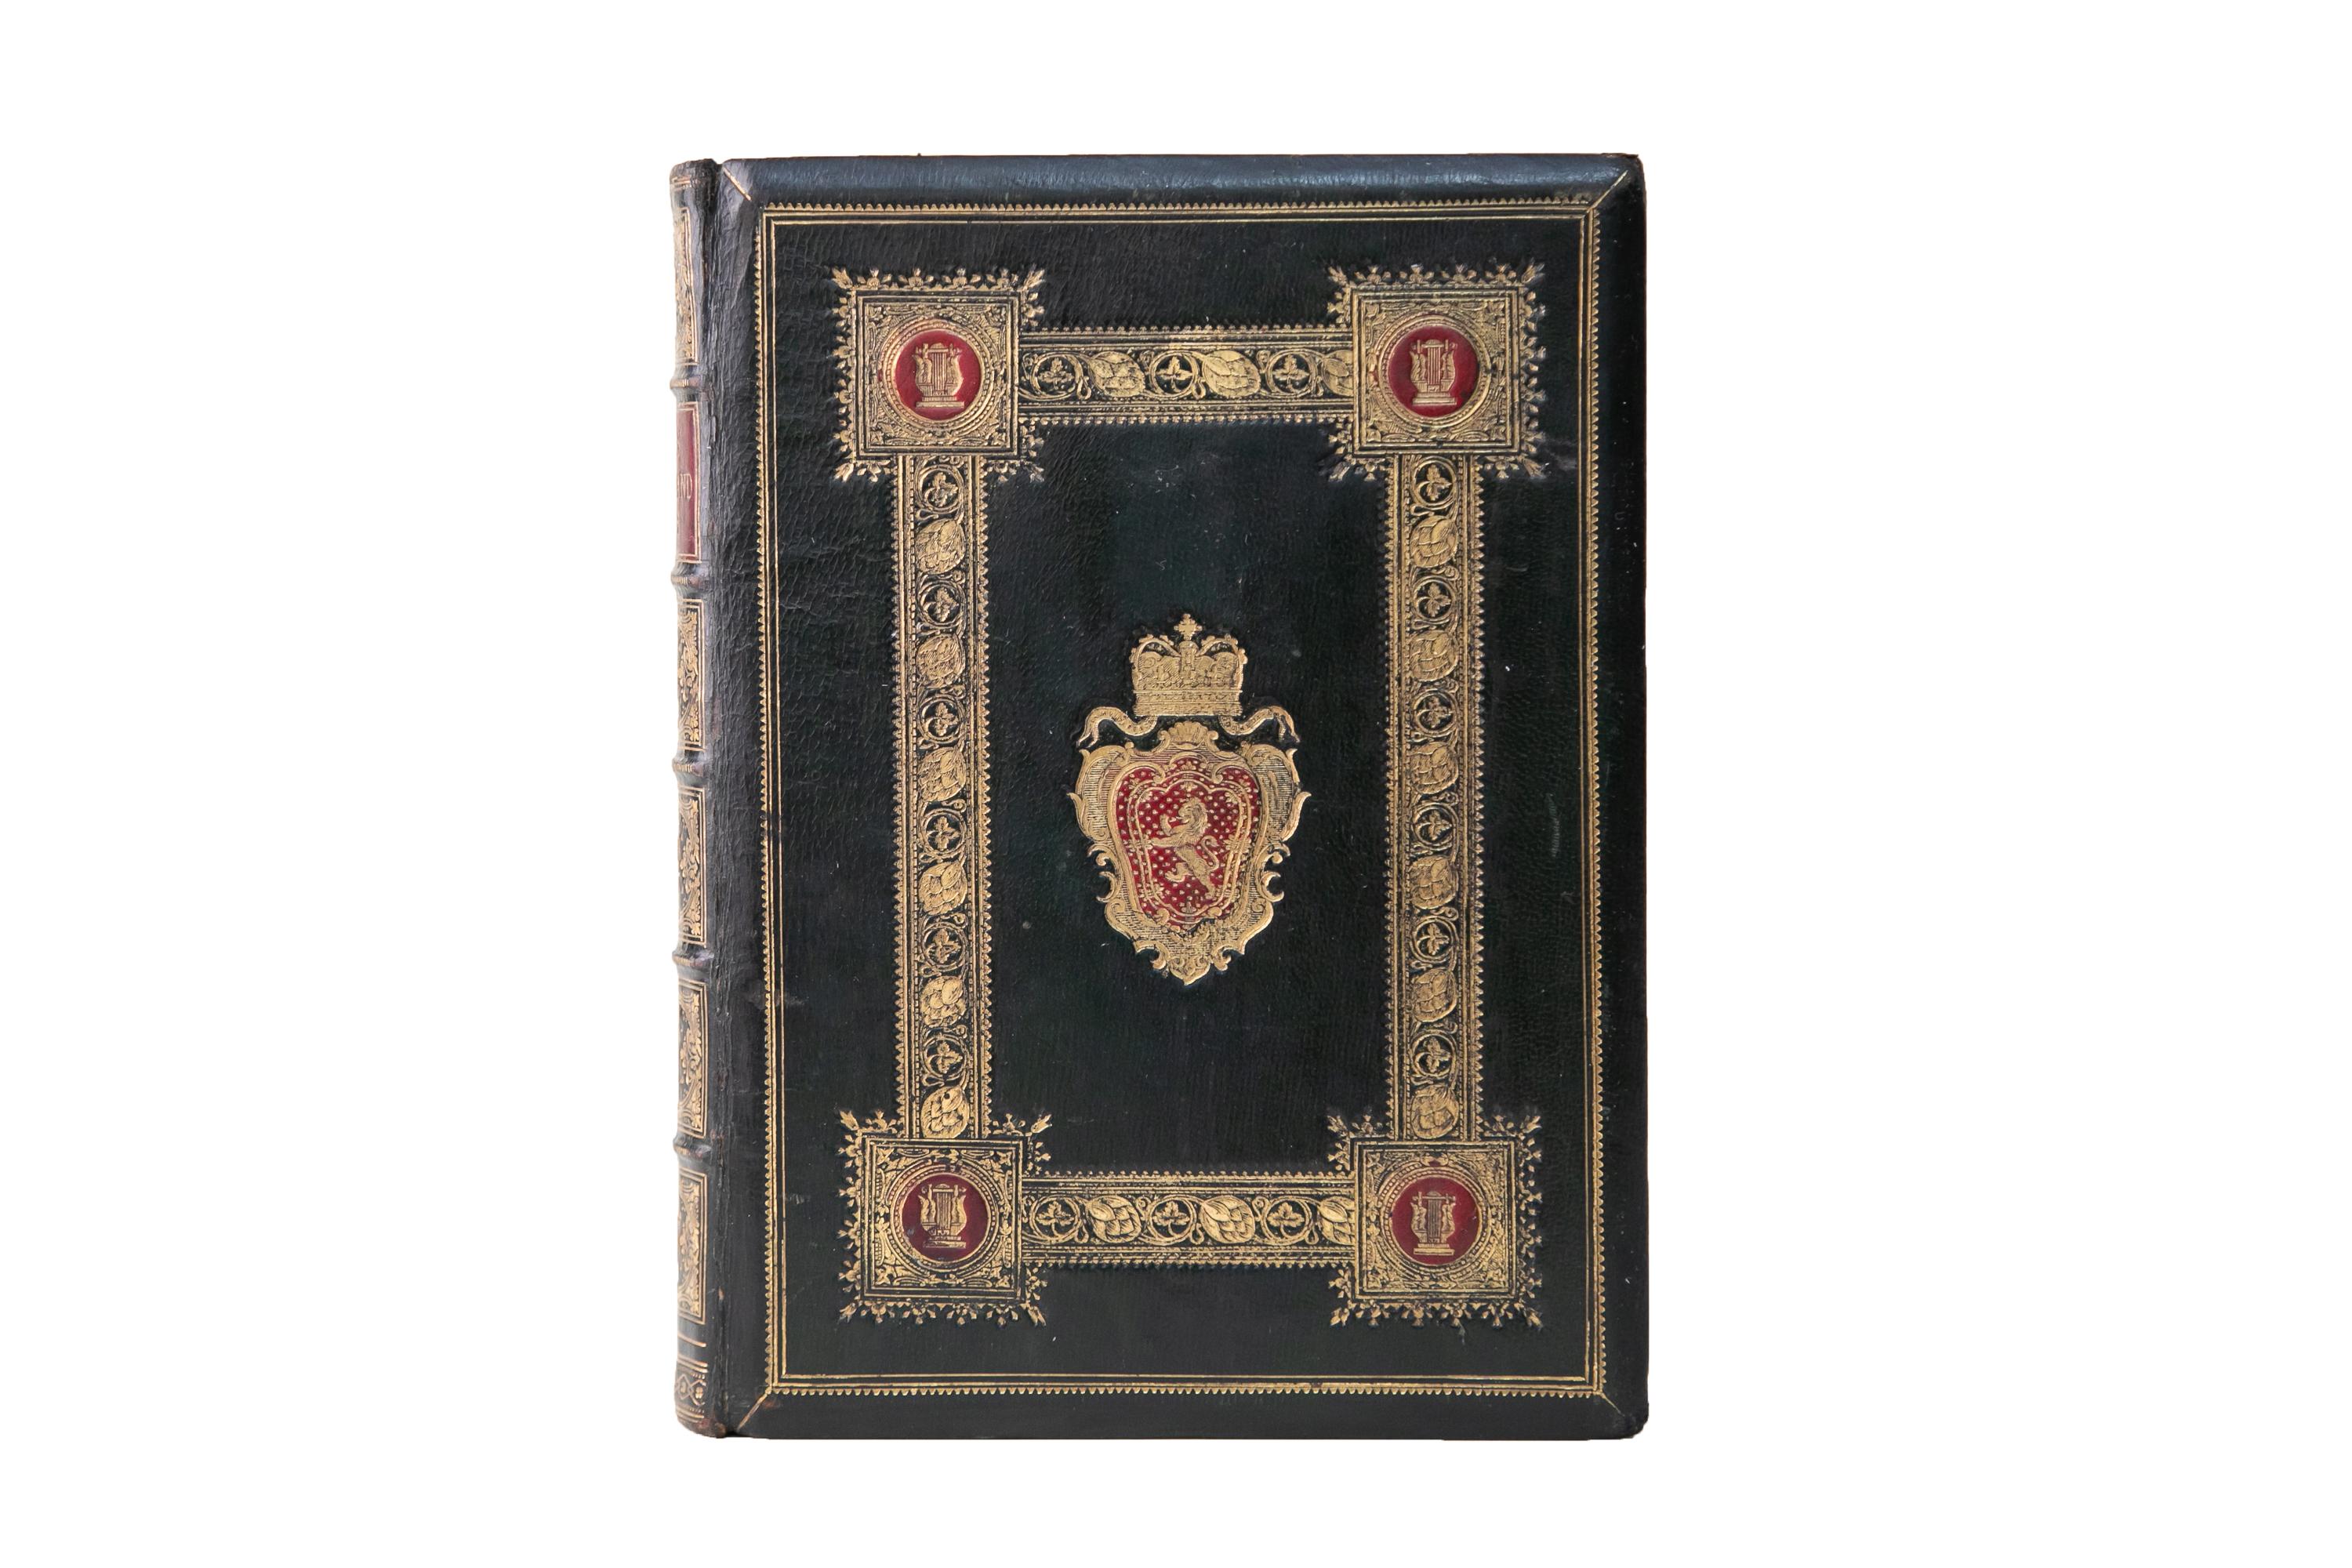 1 Volume. Robert Burns, Poems and Songs. Bound in full green morocco with the covers displaying ornate gilt-tooled and red inlaid details forming floral borders, corner illustrations, and a central crest. The spines display raised bands, panel